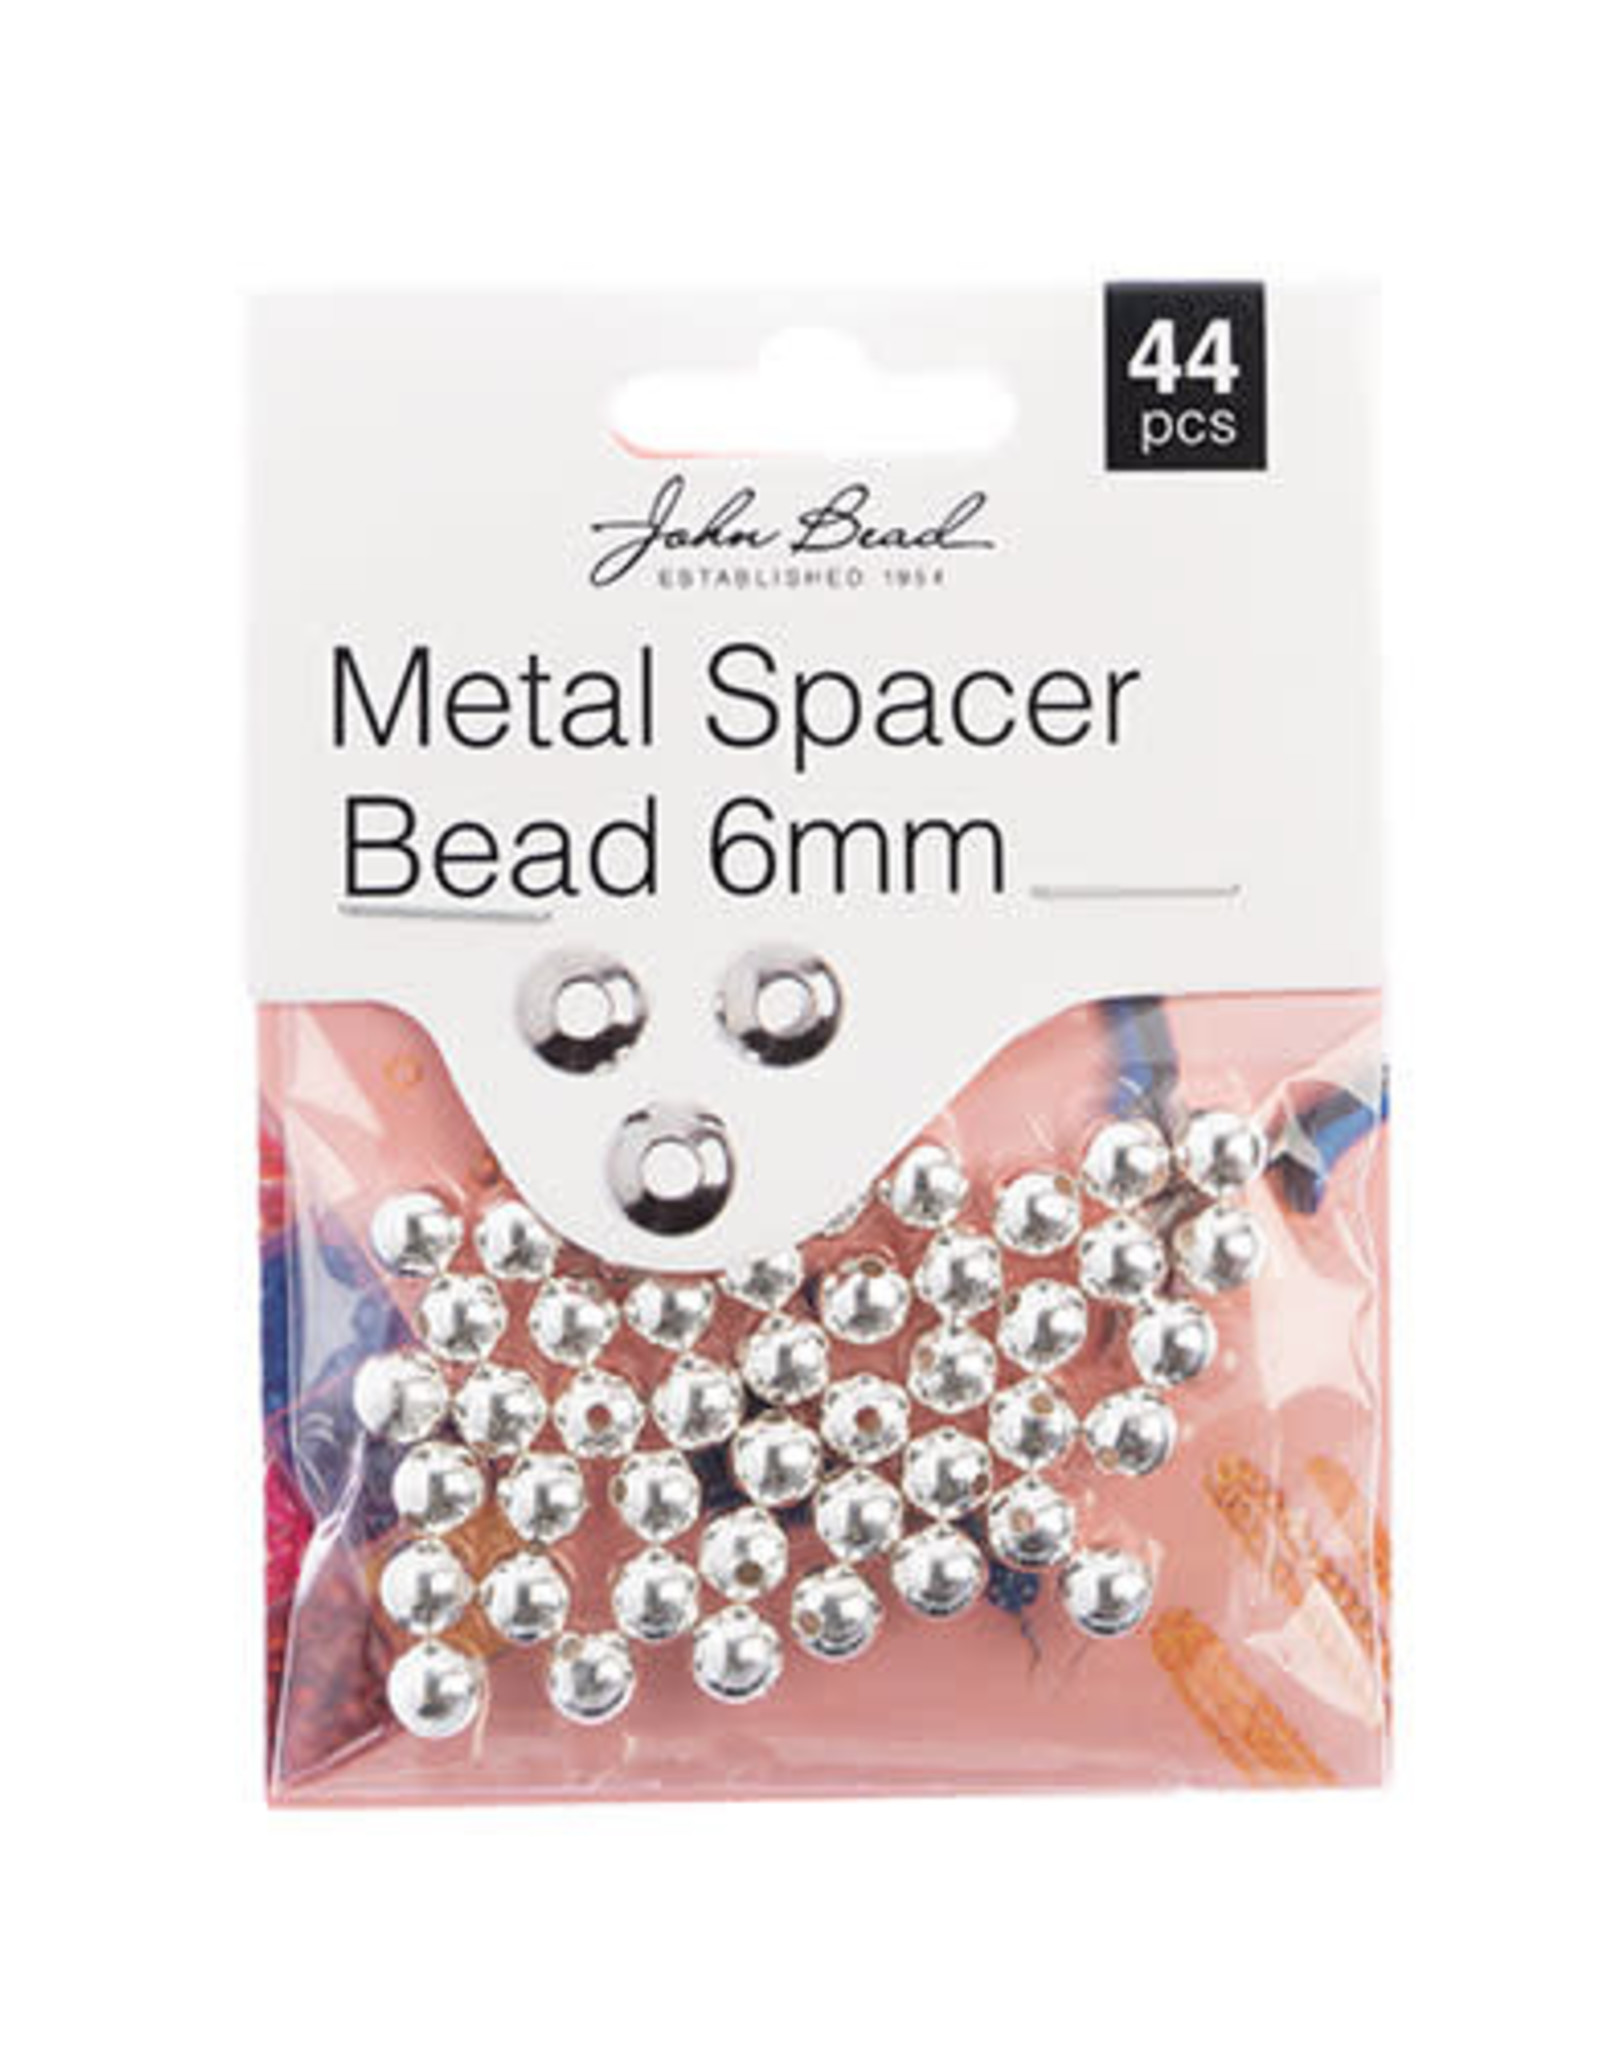 Craft Supplies Must Have Findings - Metal Spacer Bead 6mm Silver 44pcs